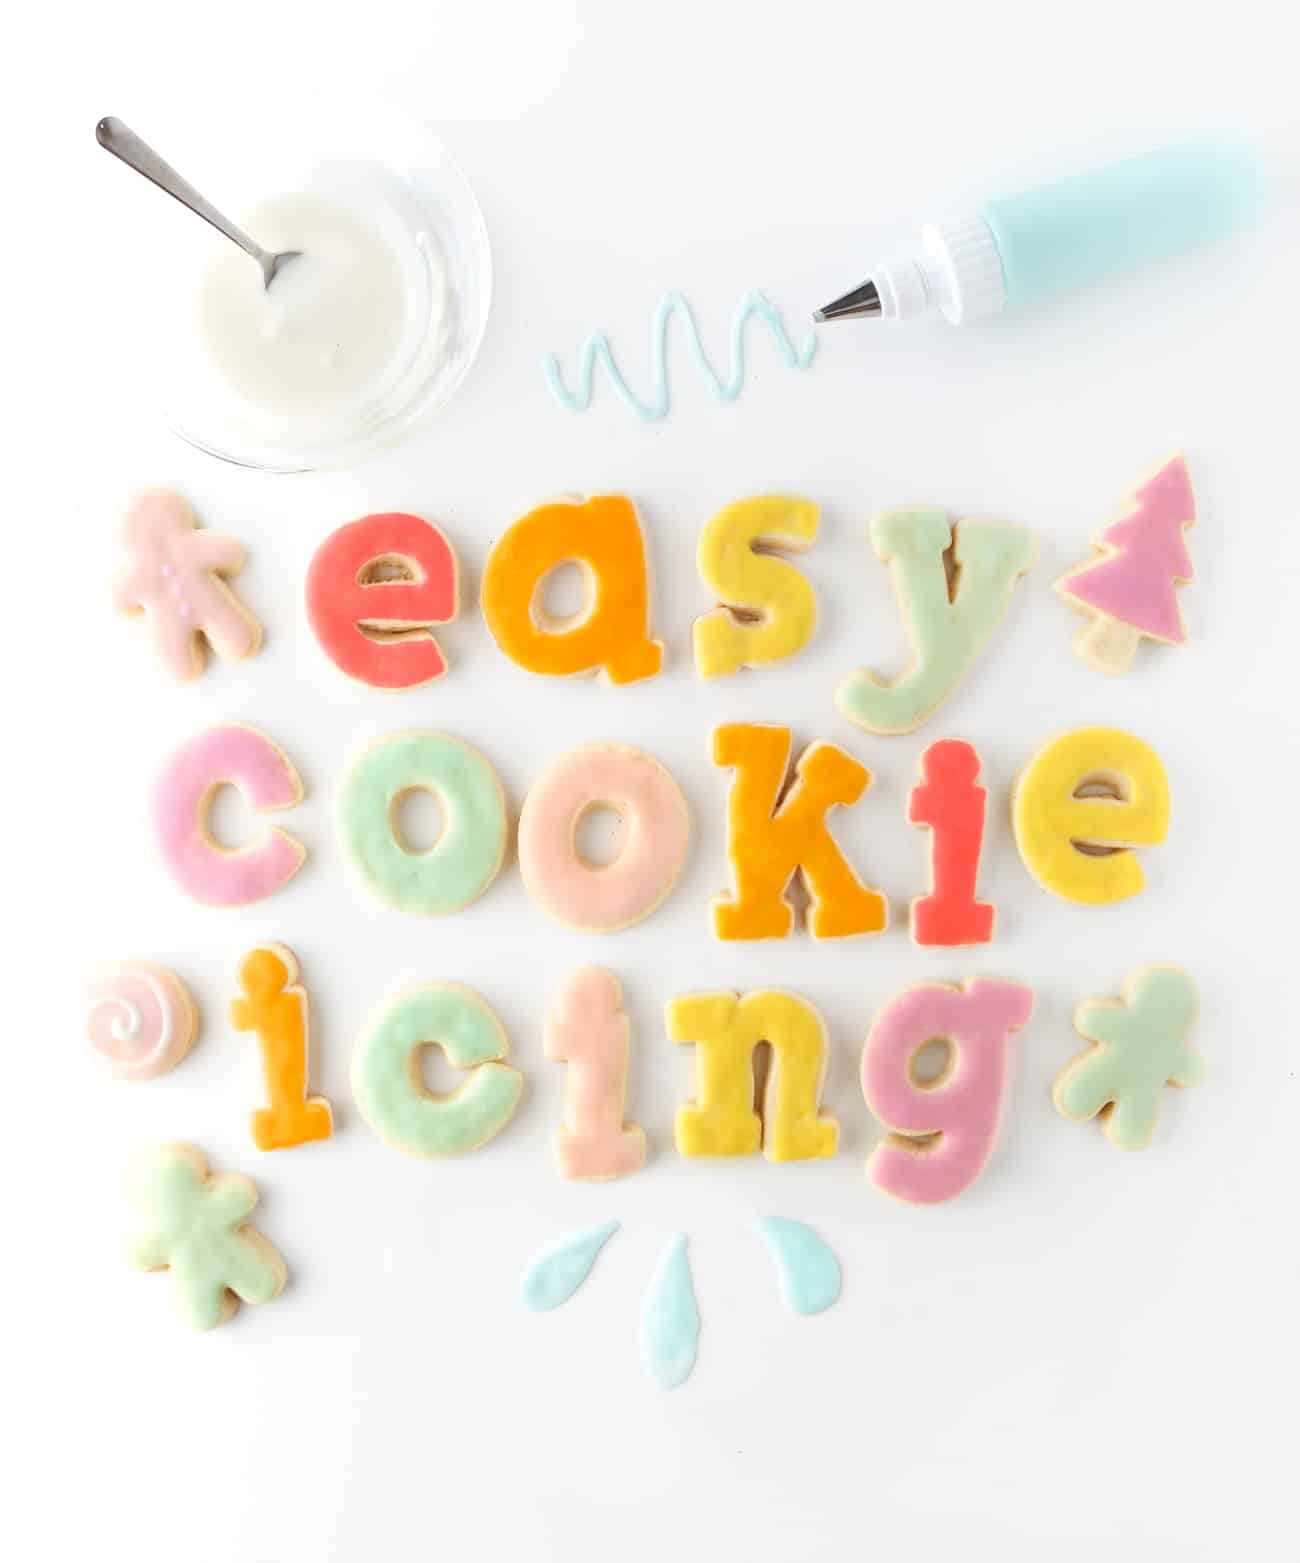 Rainbow sugar cookies spelling out the words Easy Sugar Cookie Icing. White bowl of icing with bottle of blue icing.